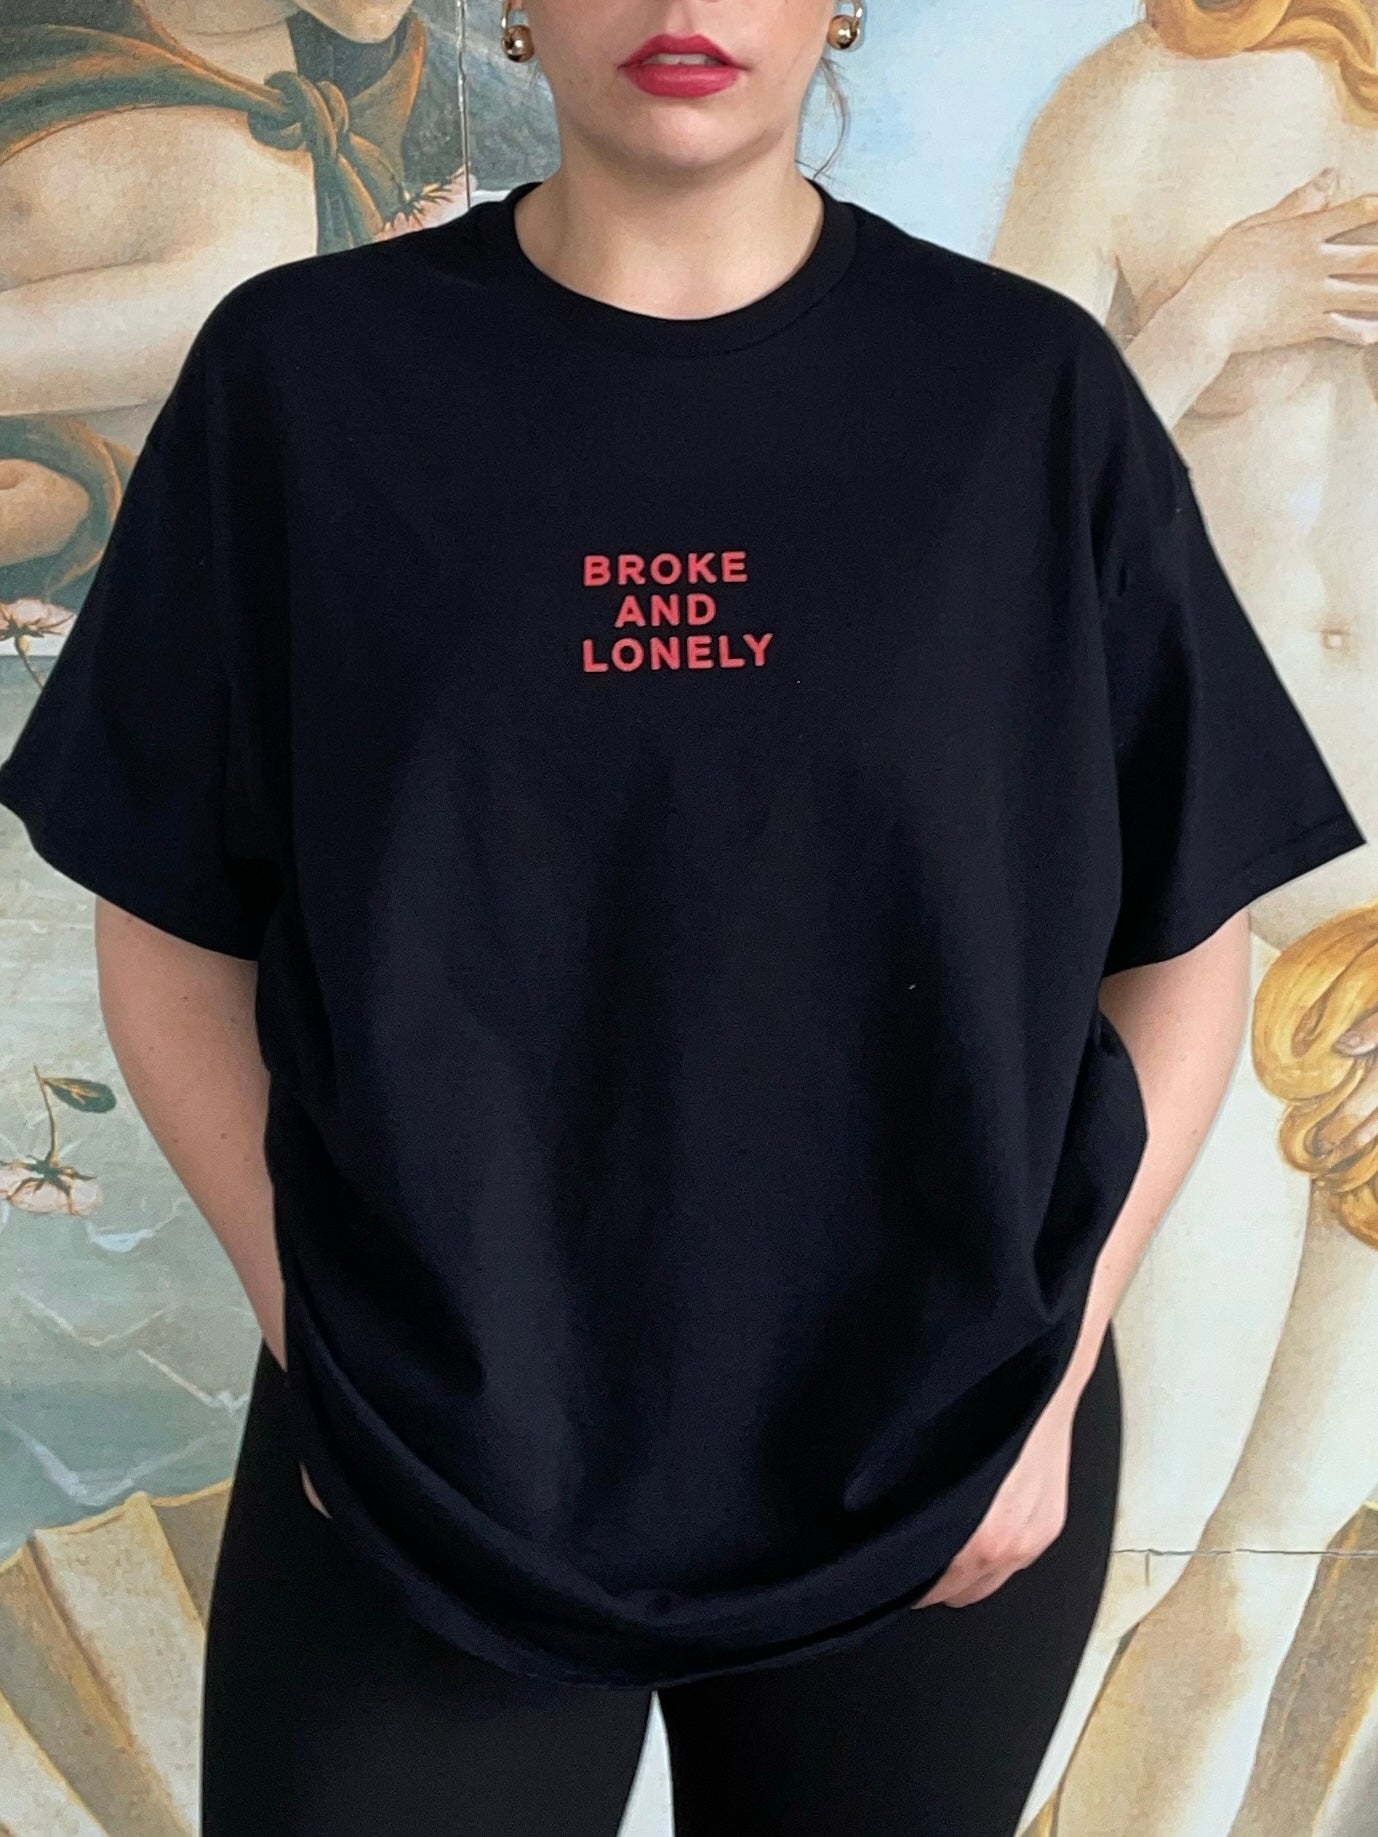 BROKE AND LONELY - shirt